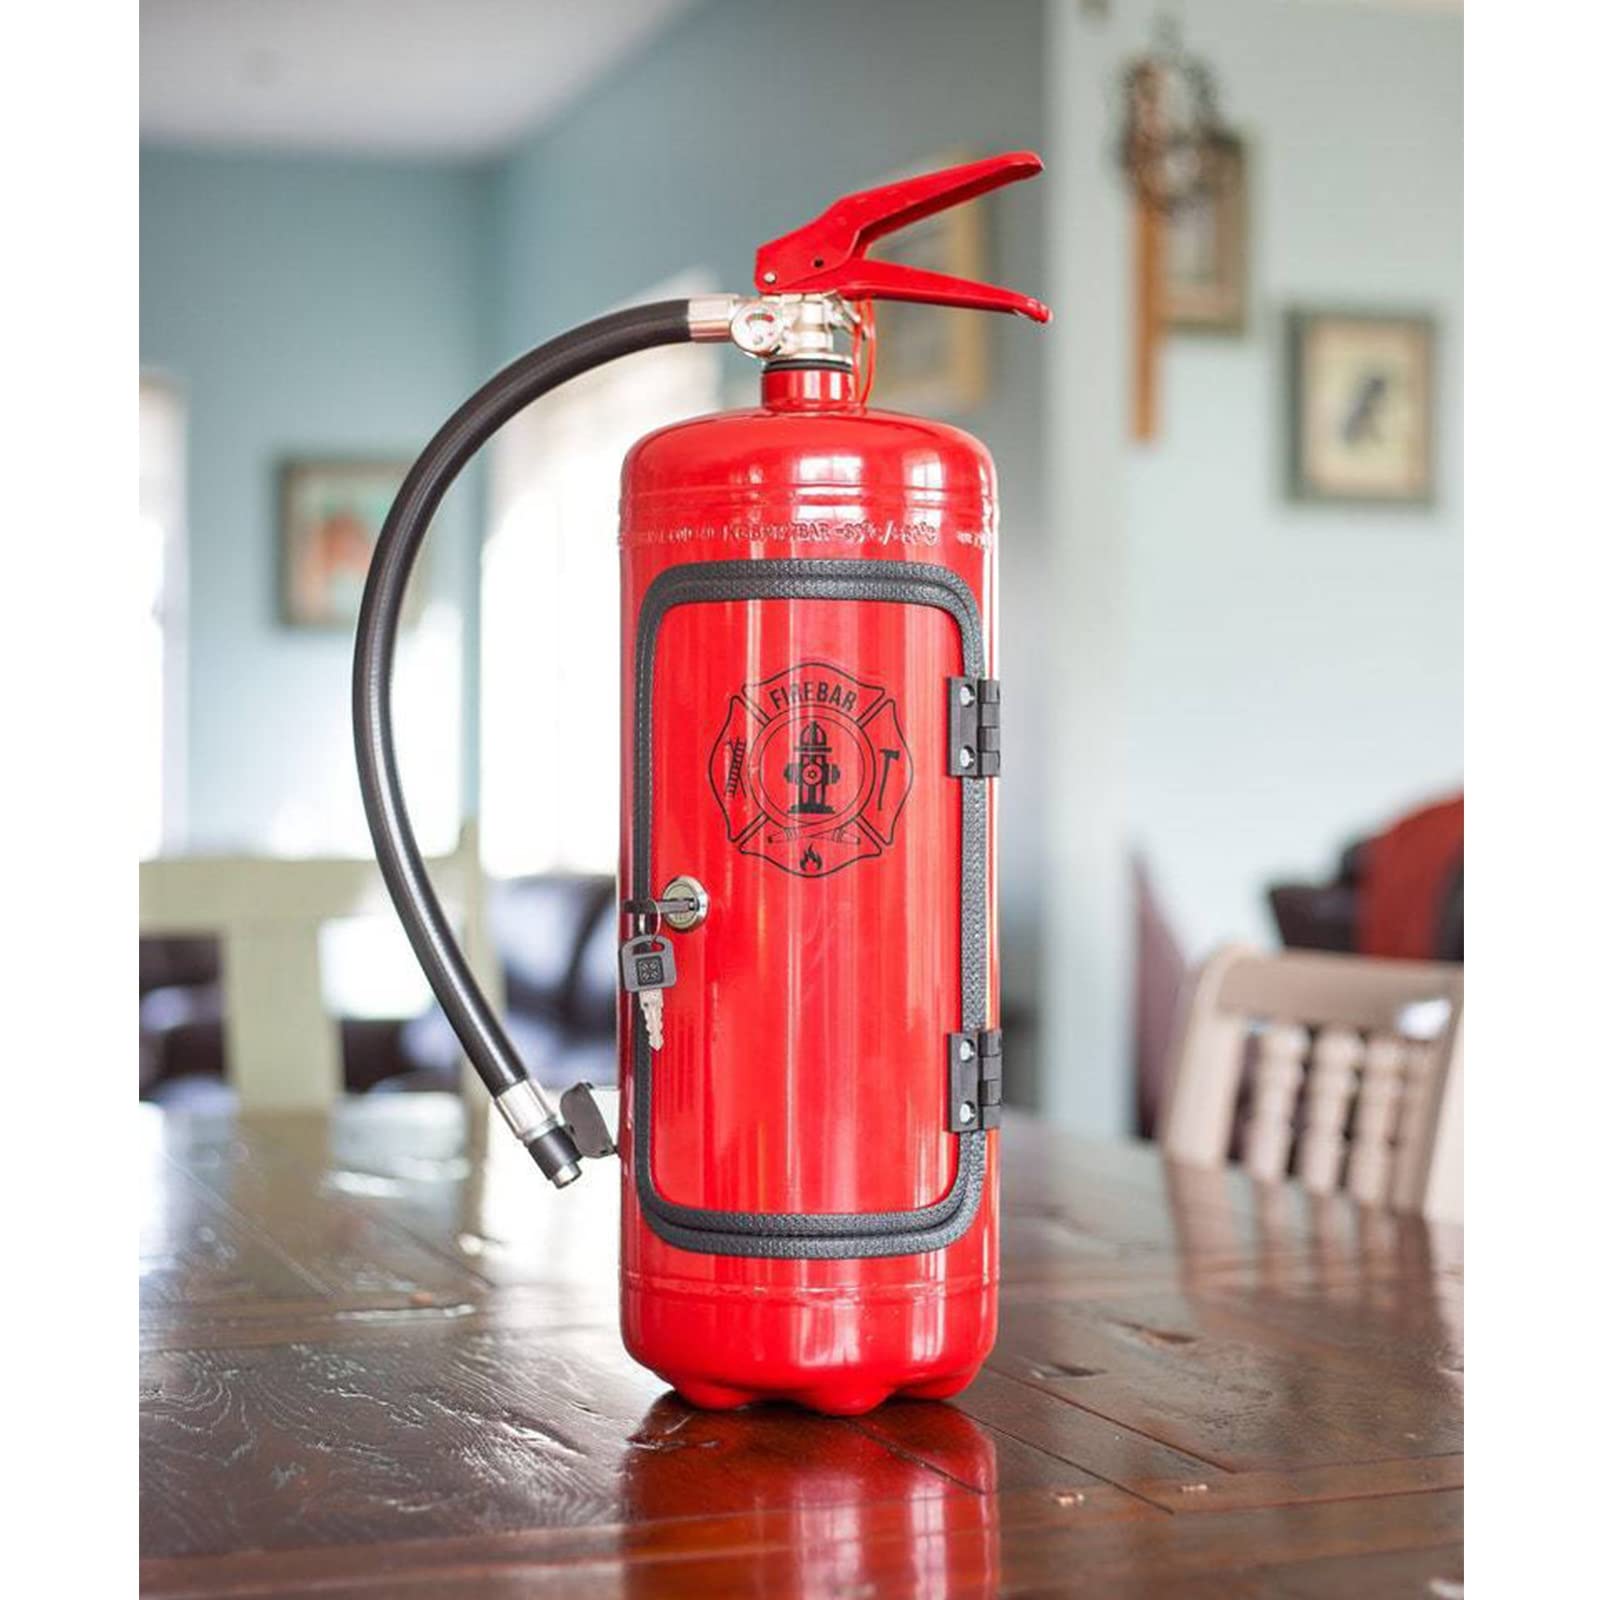 DFGH Fire Extinguisher Mini Bar-Novelty Bar Reclaimer Cave Weird Gift for Firefighters Who Love Whiskey Handmade metal firefighter Novelty camping picnic tool